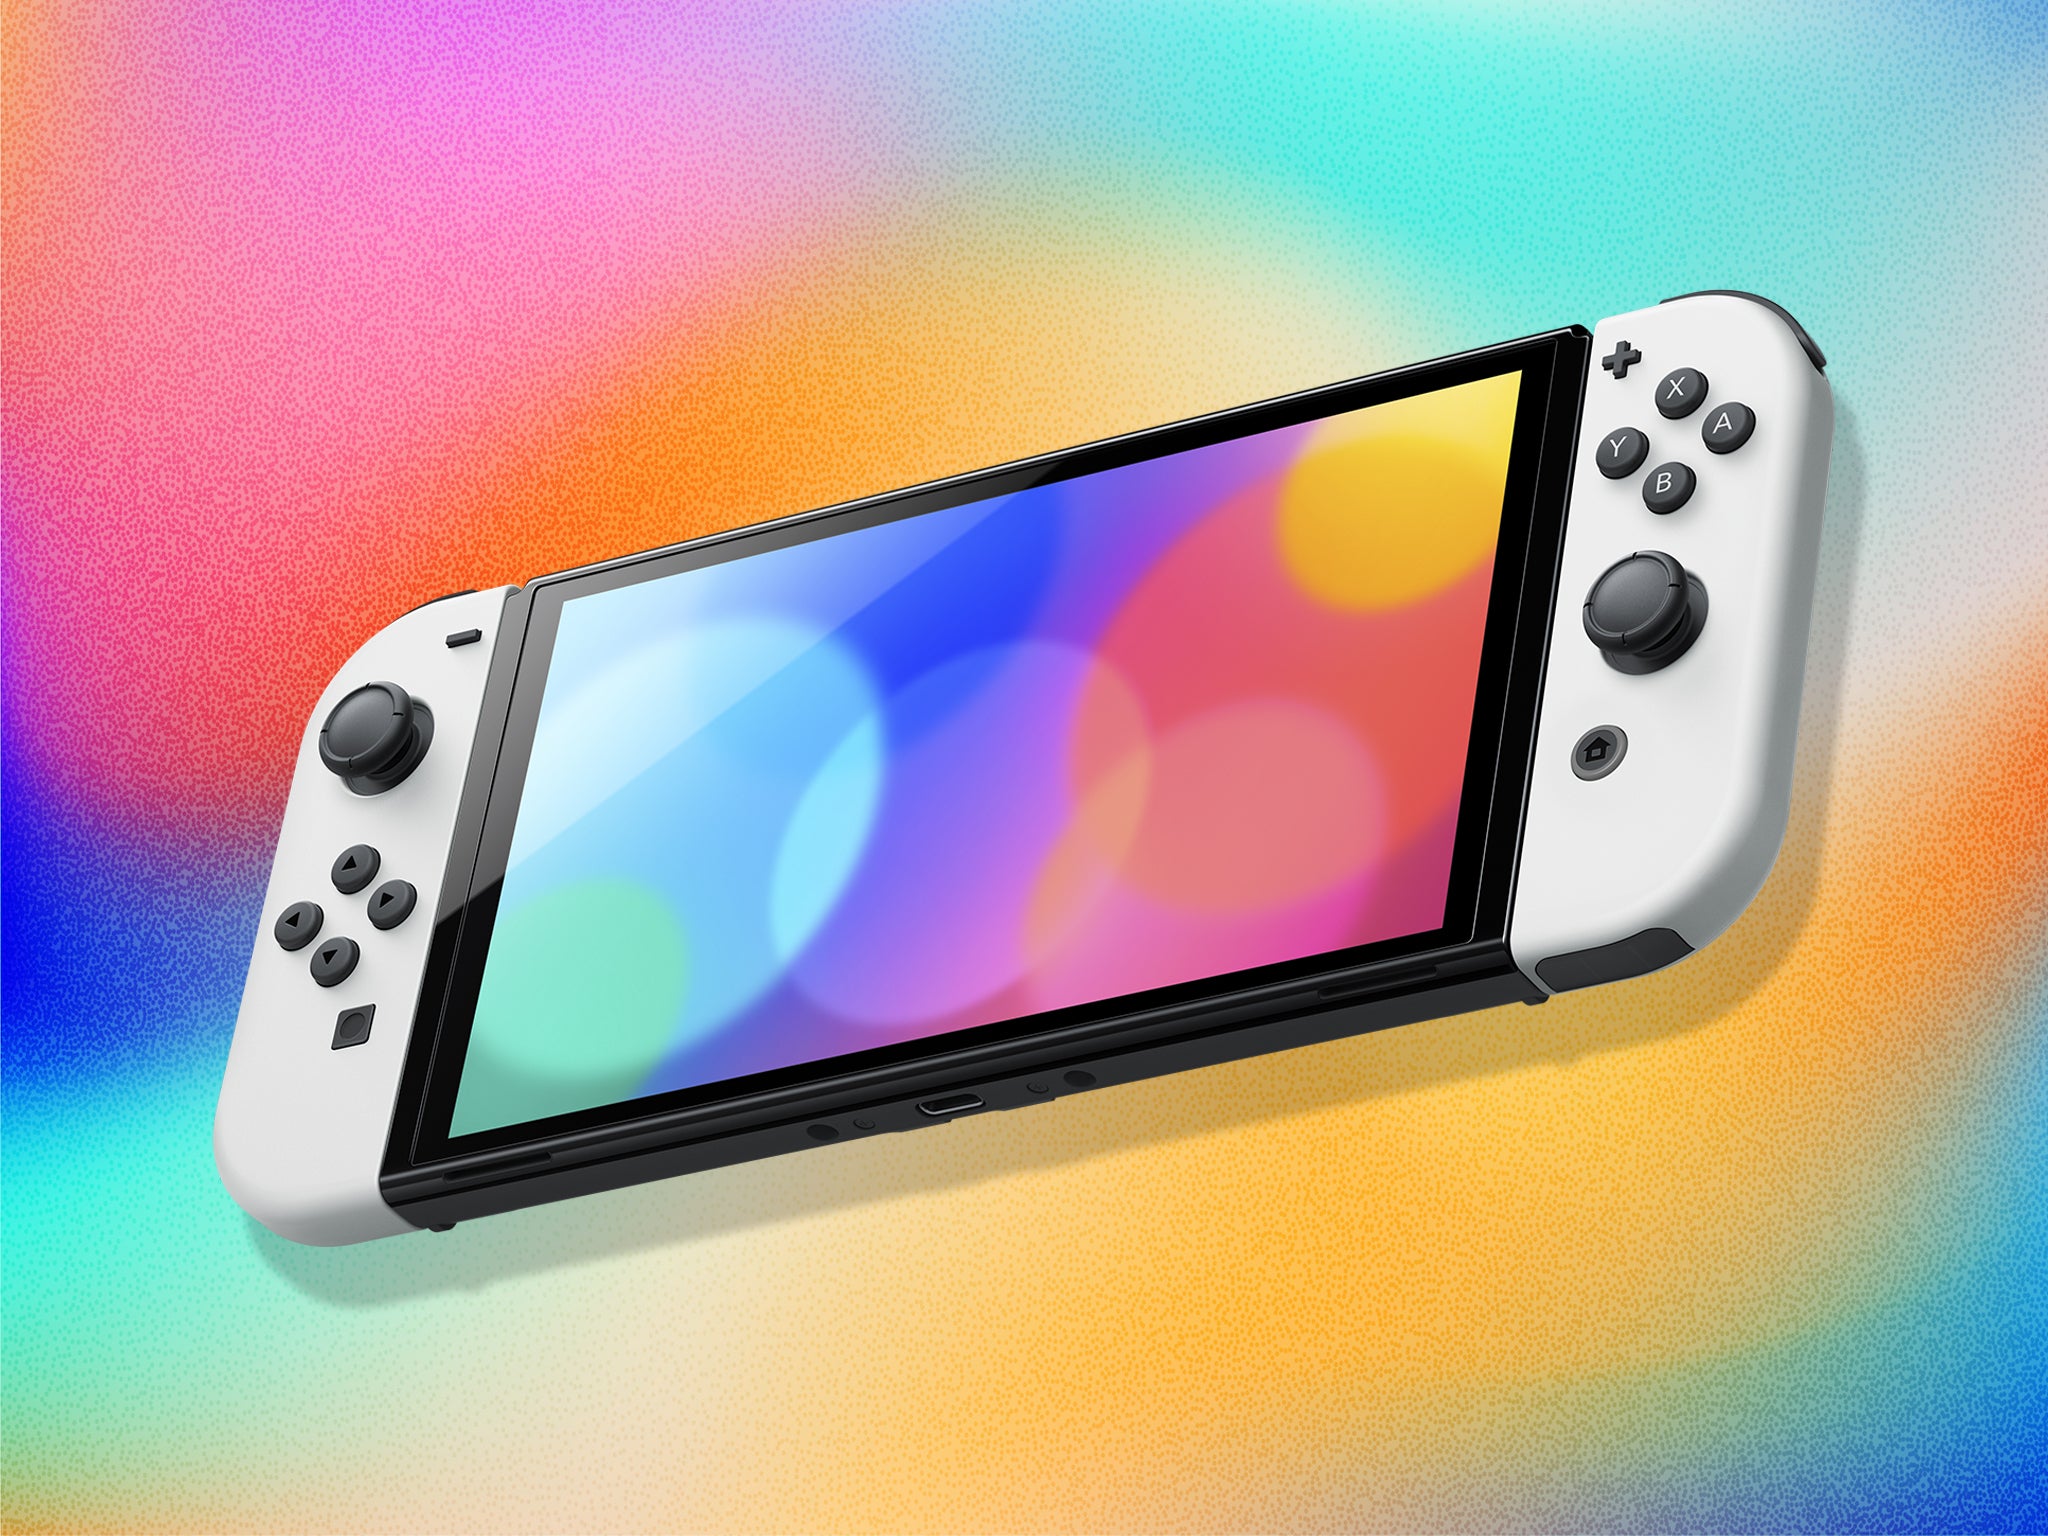 Try these games for free on Nintendo Switch!, News